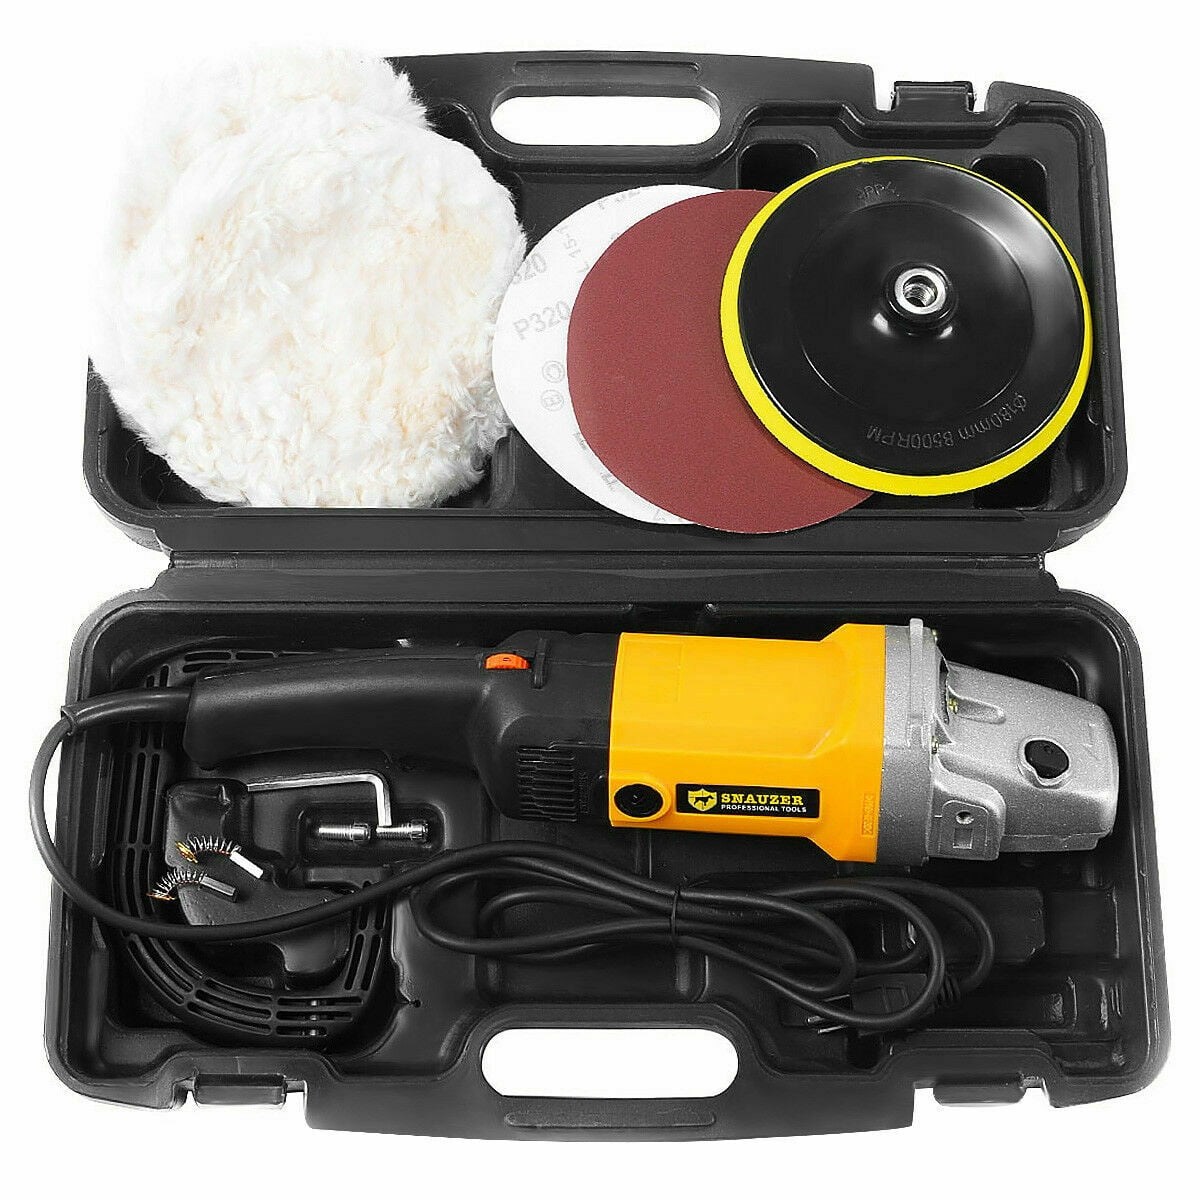 Cordless Car Buffer Polisher Up to 9 hours Ultra Endurance Variable Speed  Up to 15000 RPM